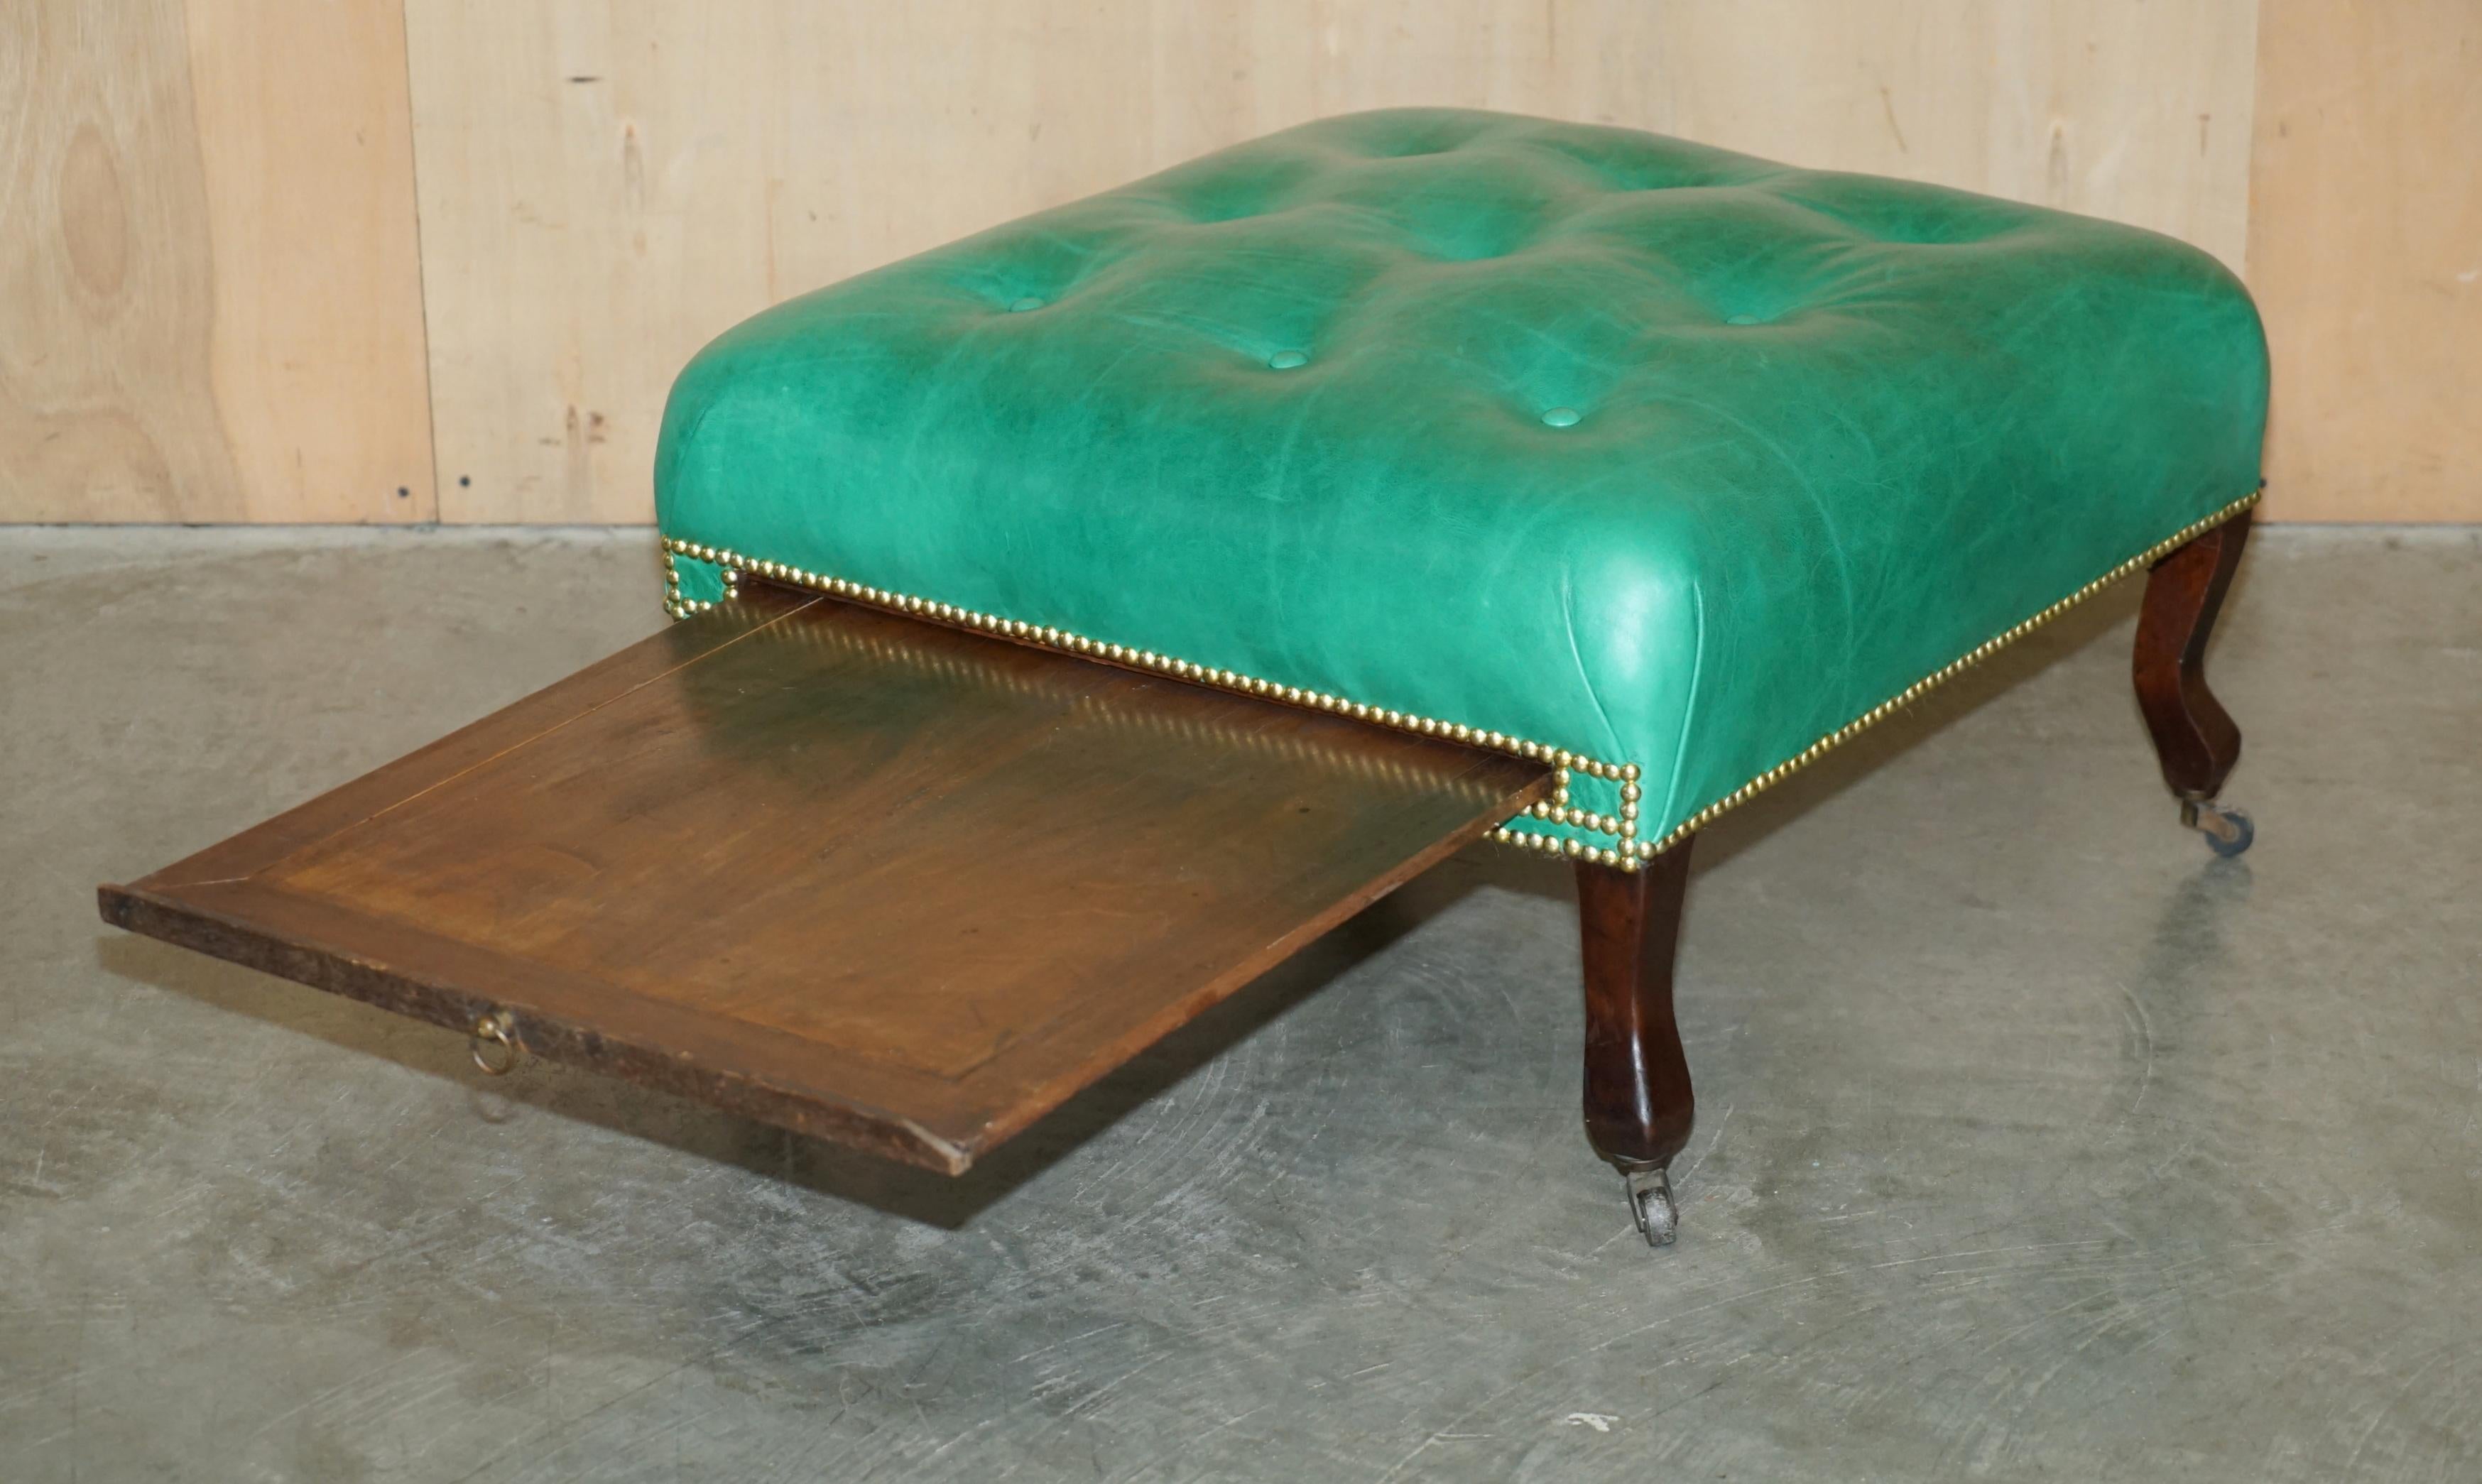 Royal House Antiques

Royal House Antiques is delighted to offer for sale this super rare, hand made in England circa 1780 Georgian footstool with unique Butlers slip serving tray which has been fully restored with Chesterfield tufted Green heritage